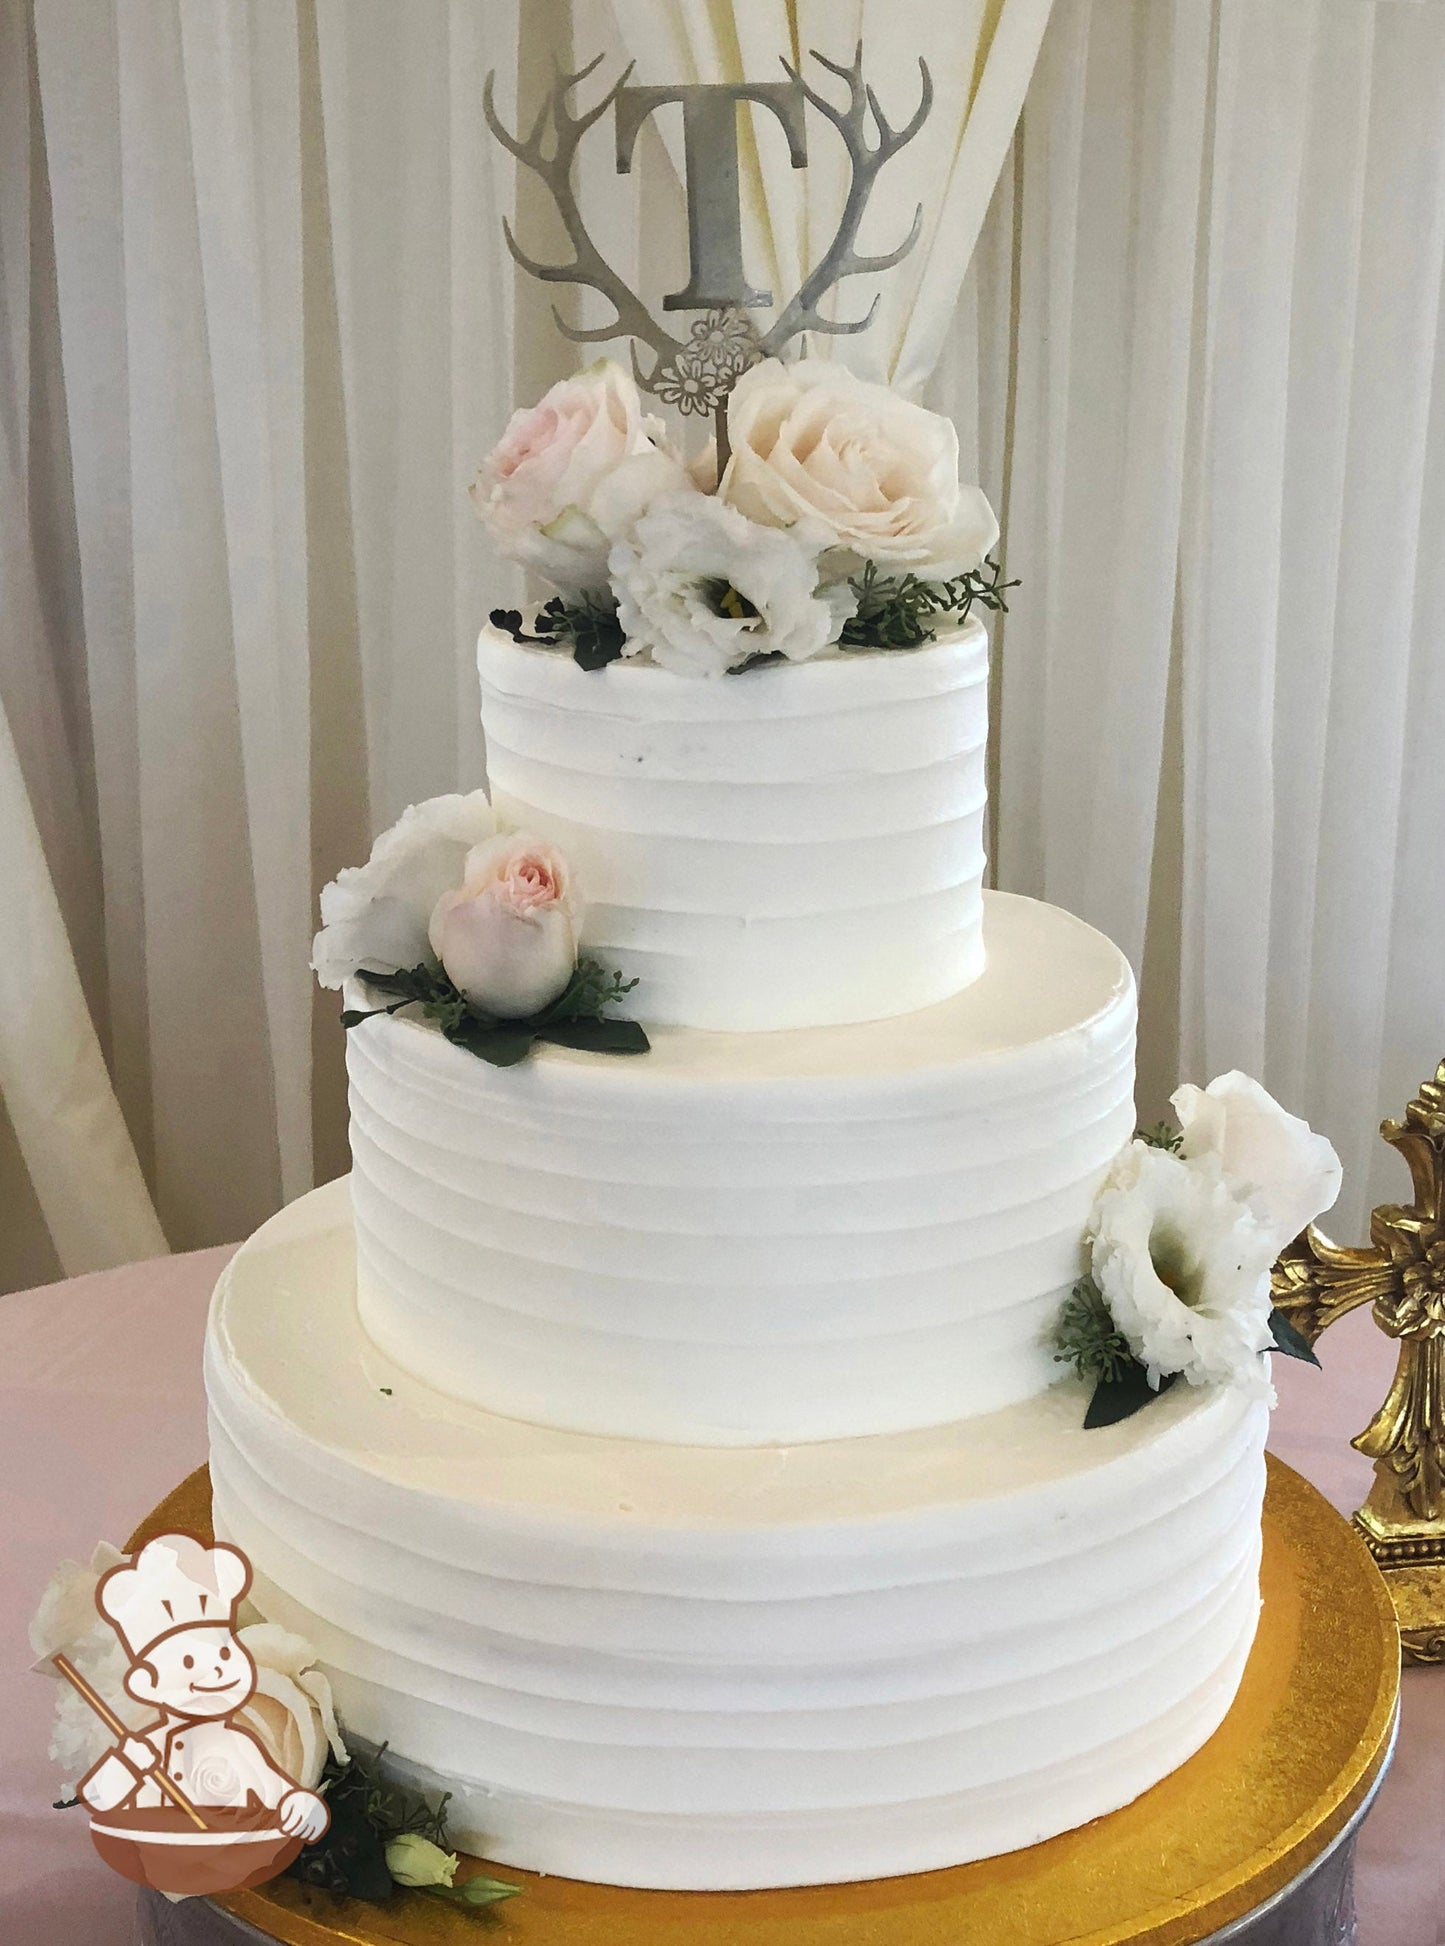 3-tier cake with white icing and decorated with a light horizontal texture and fresh flowers in pink and white colors.